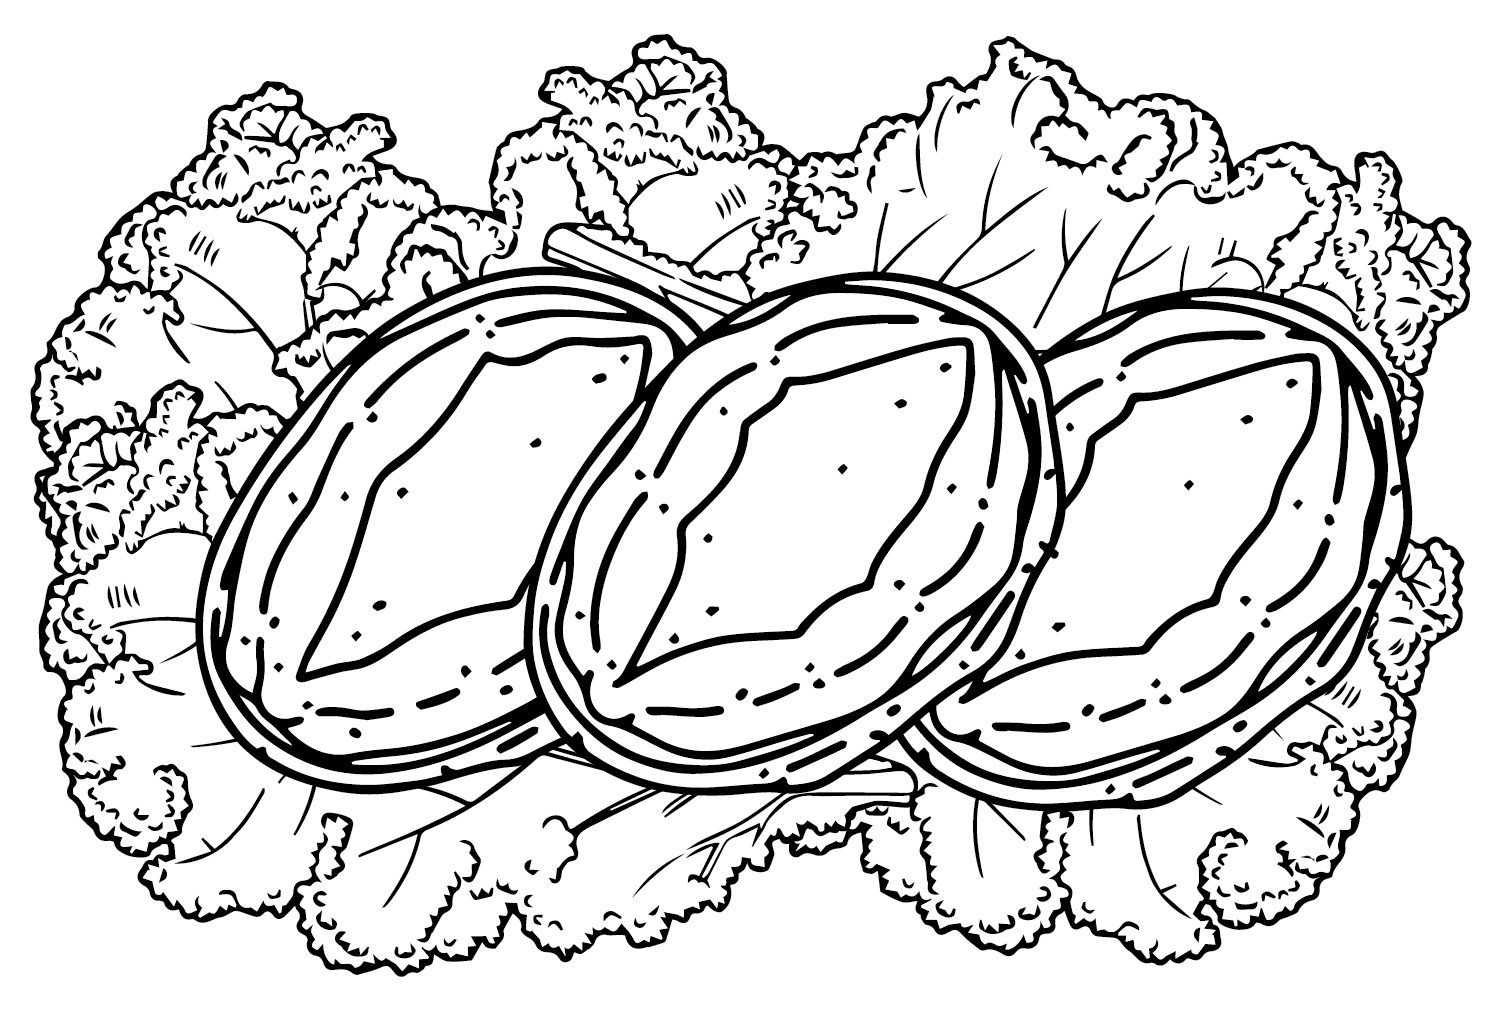 Abalone Coloring Page for Adults from Abalone